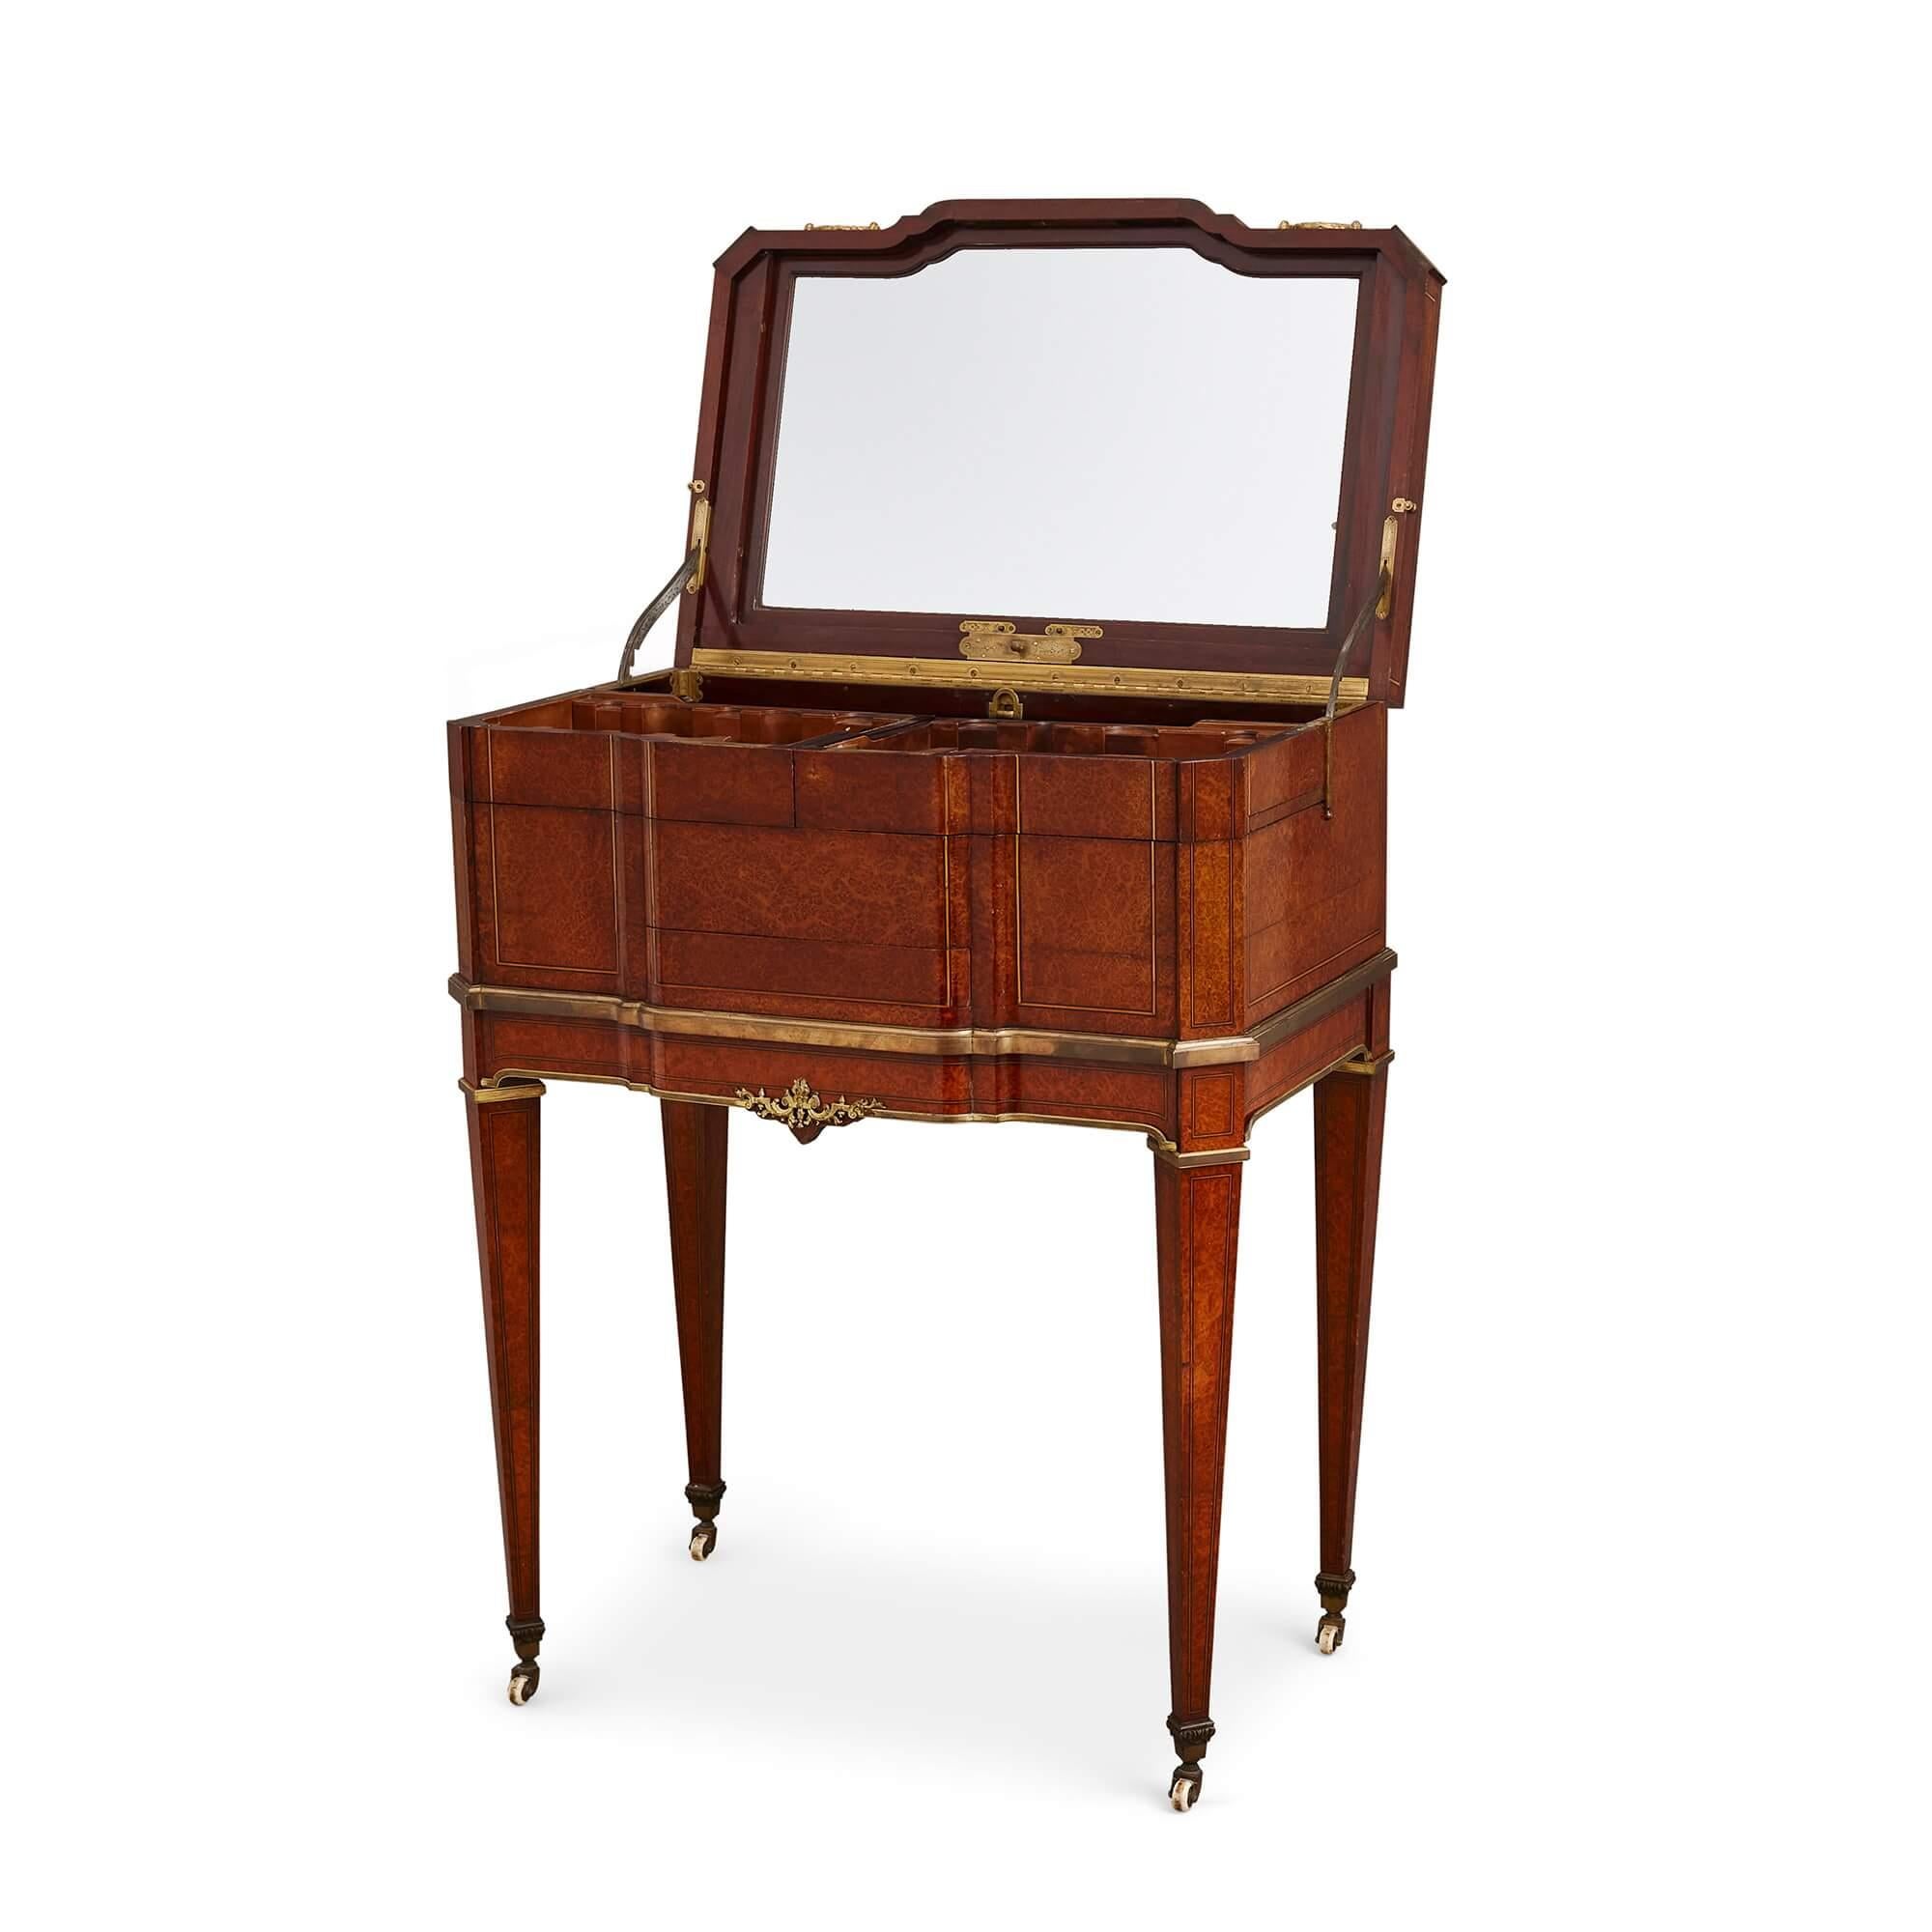 19th Century Ormolu Mounted Amboyna and Mahogany Louis XVI Style Antique Dressing Table For Sale